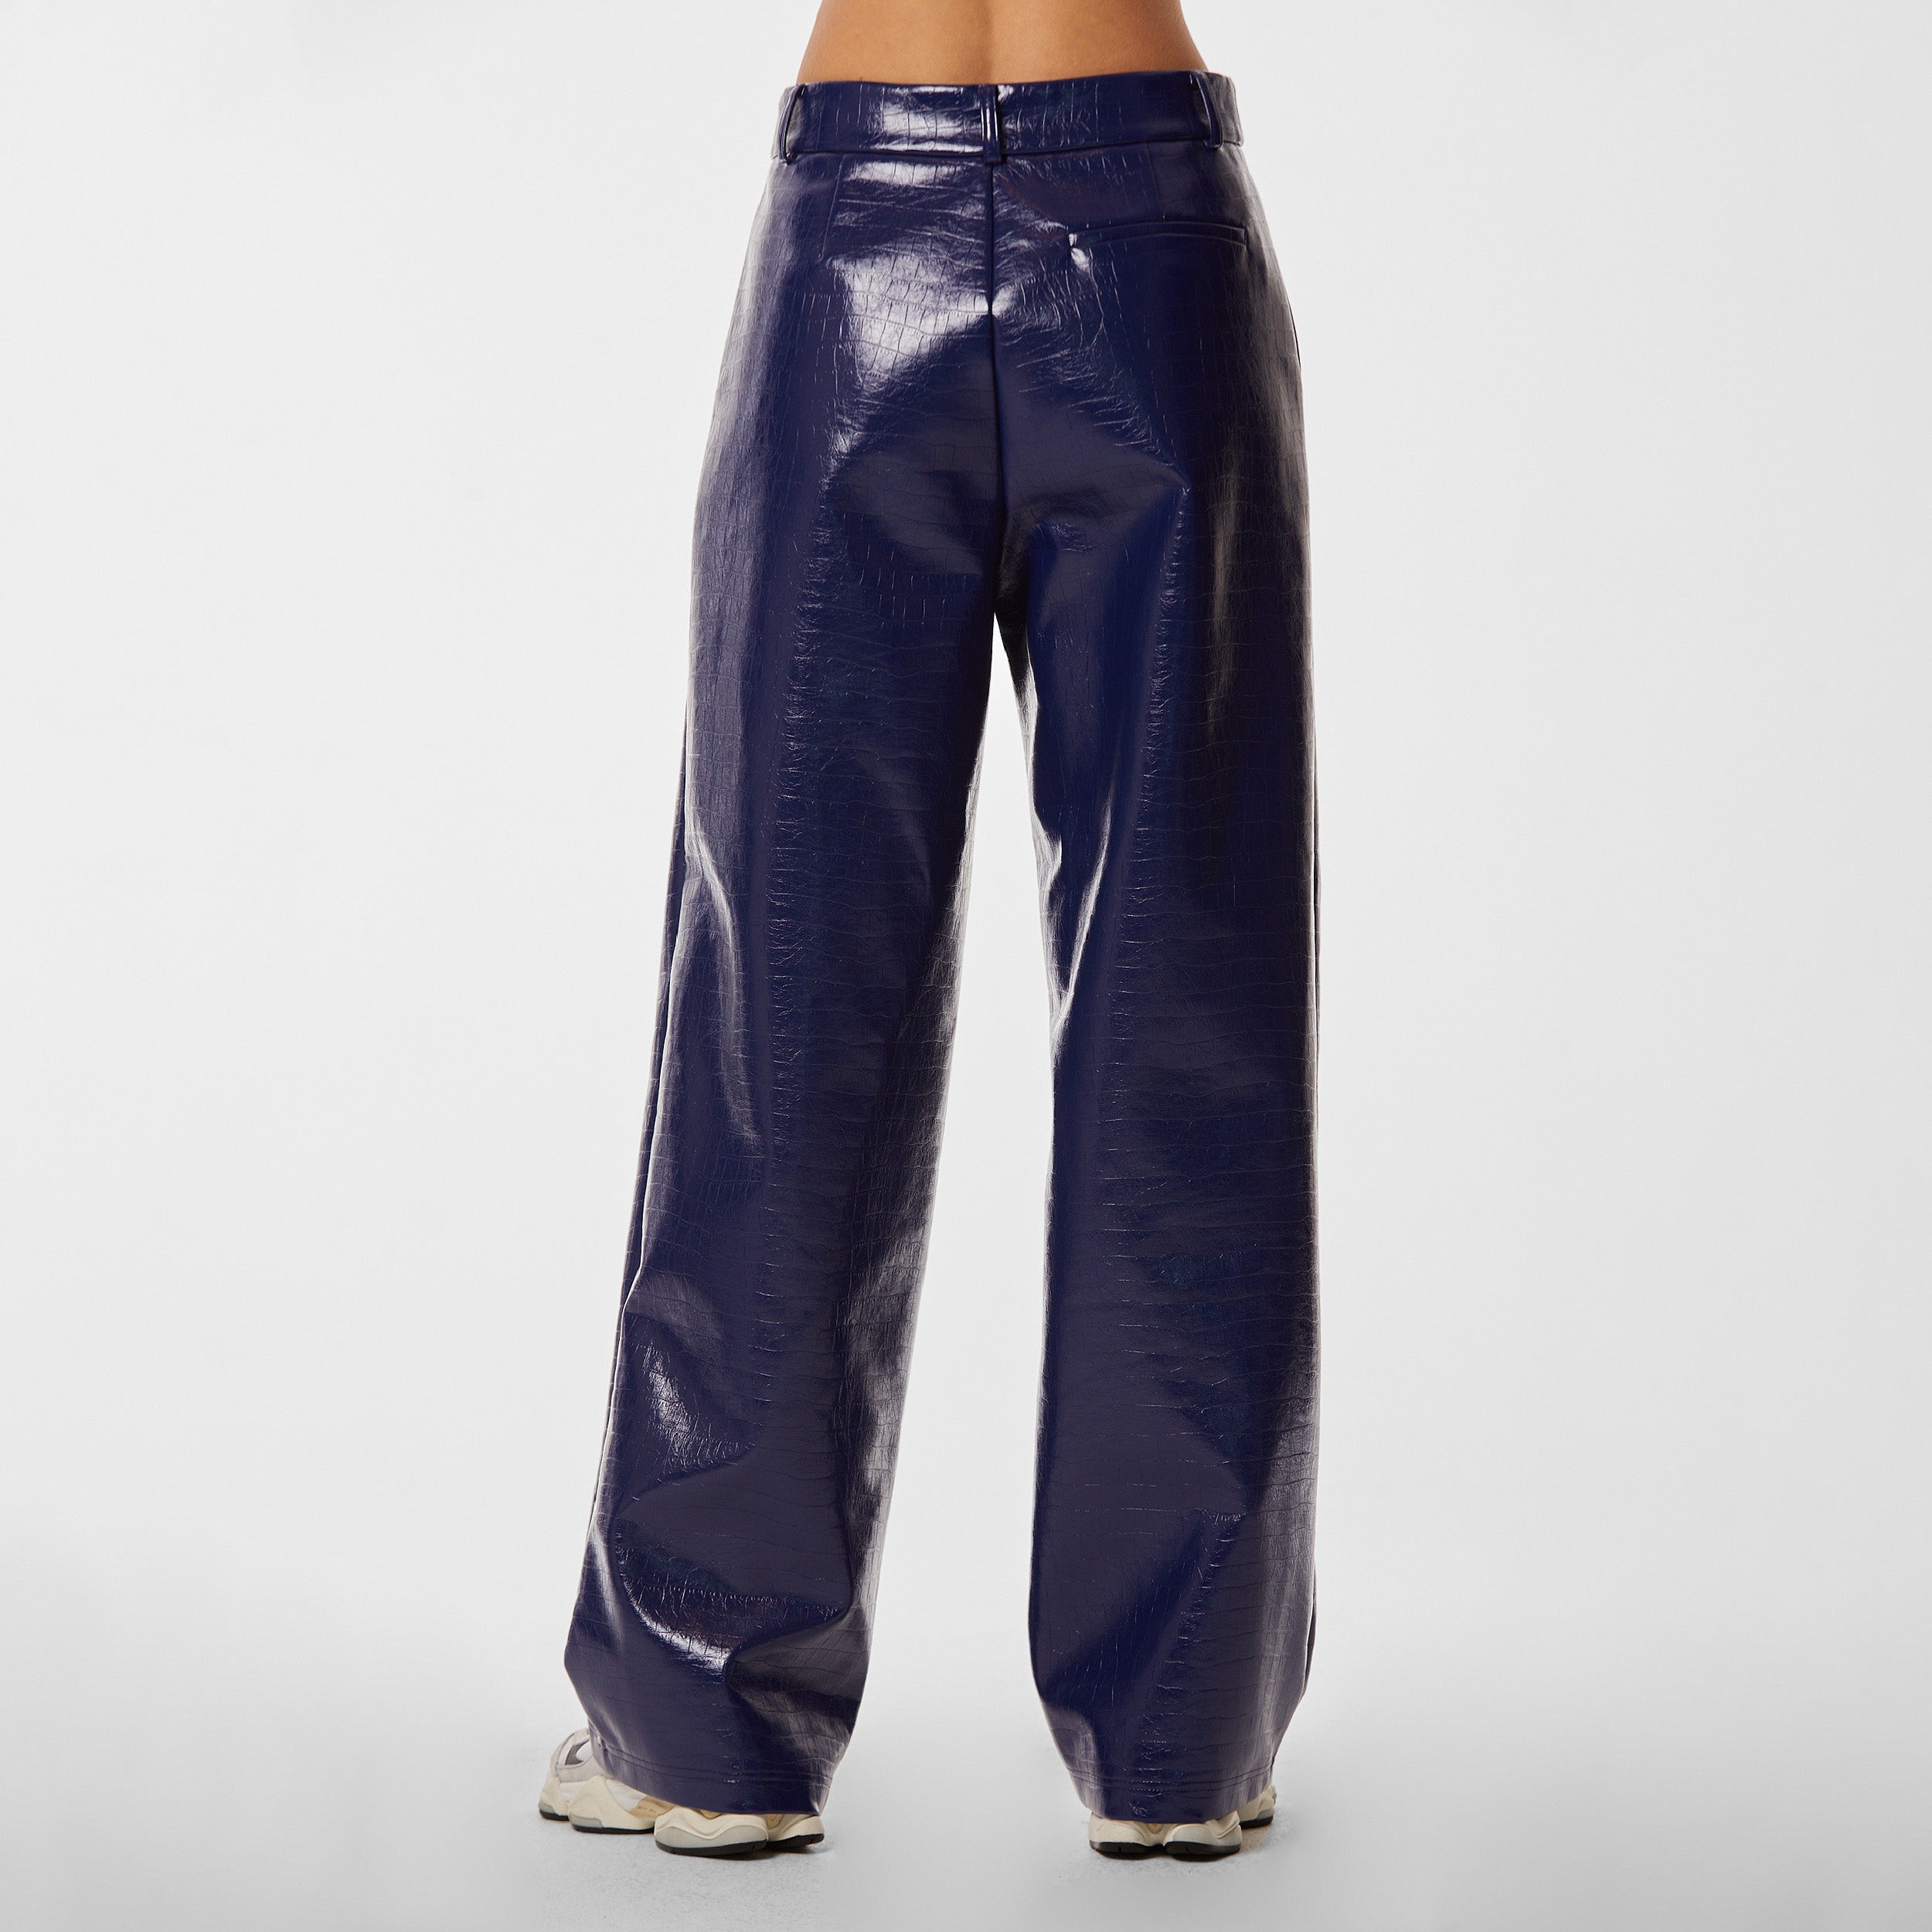 Rear view of woman wearing navy blue faux leather croco pattern embossed wide leg pant.